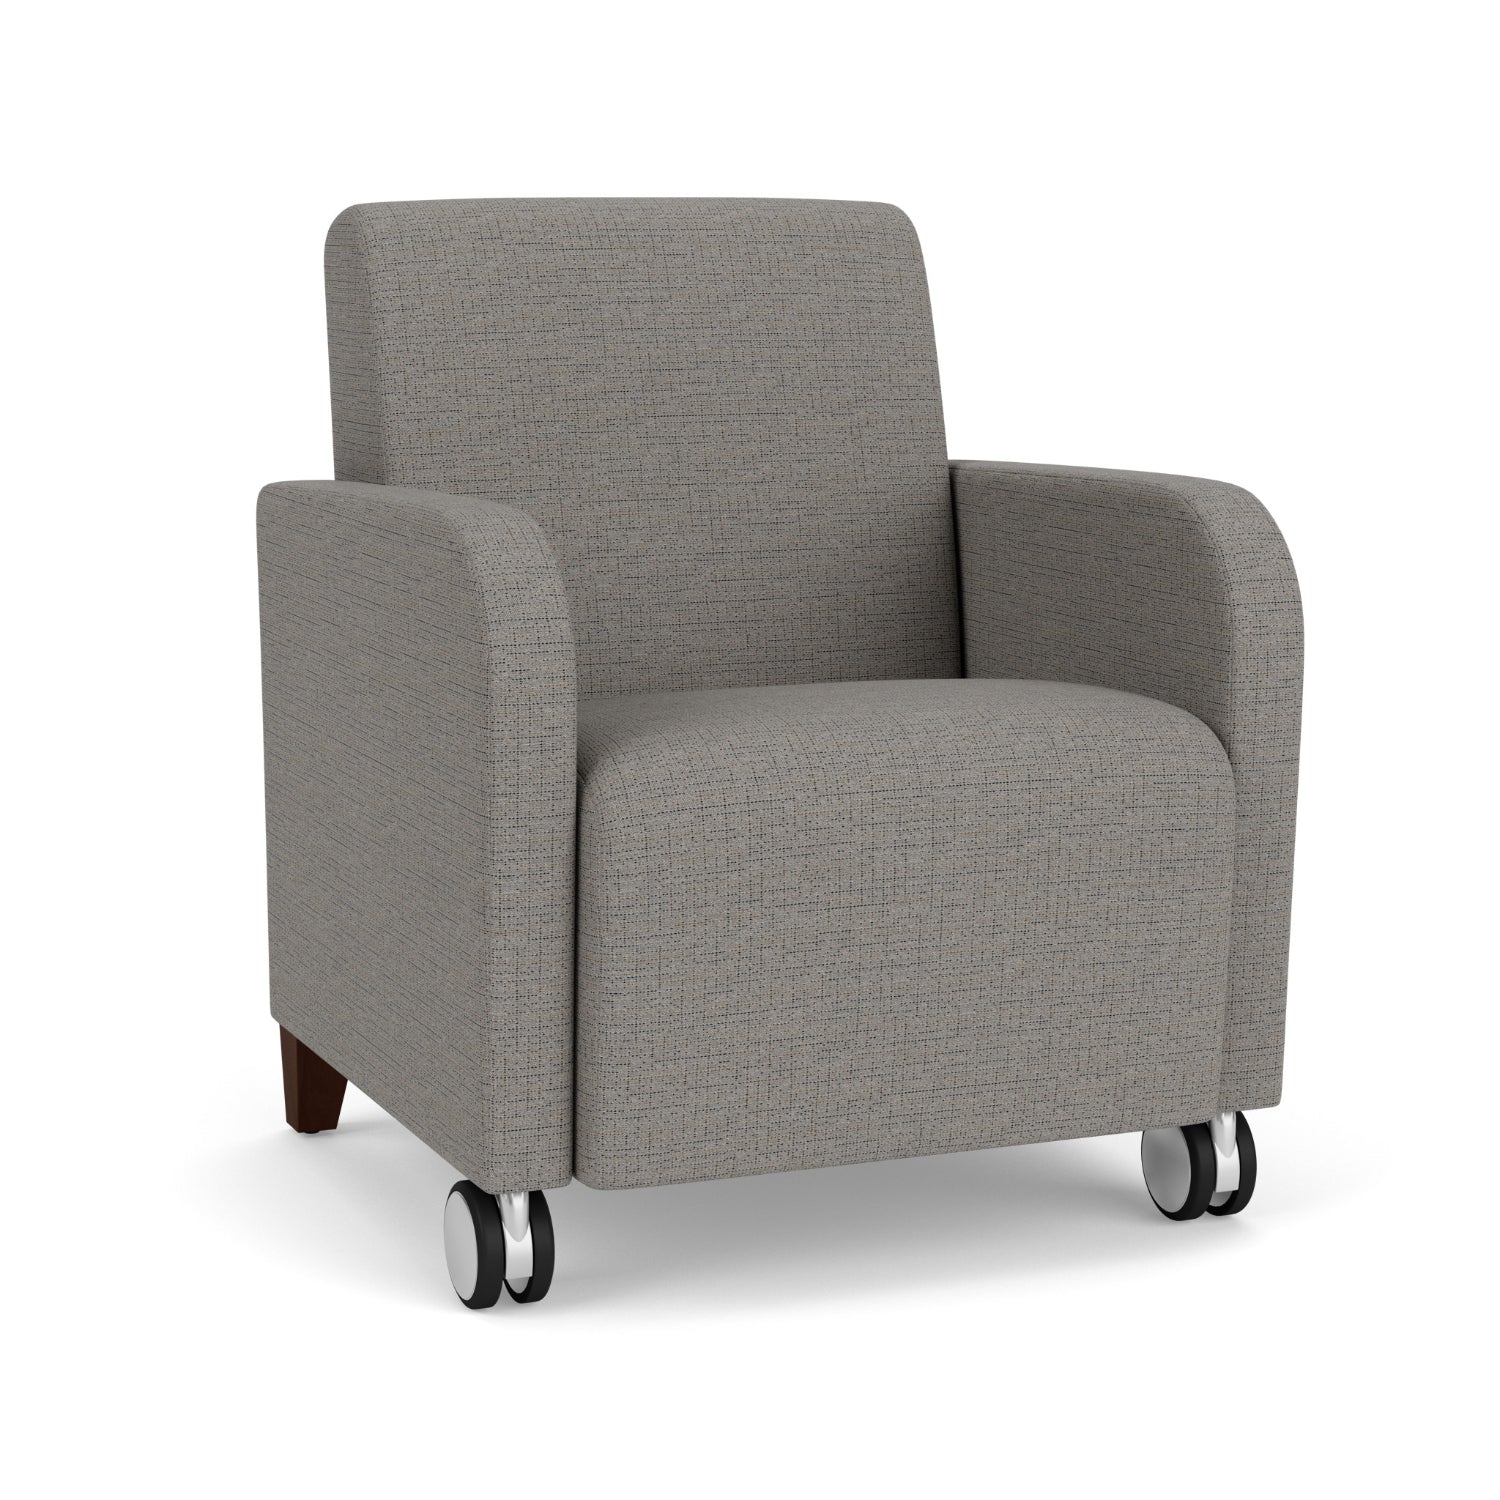 Siena Collection Reception Seating, Guest Chair with Front Casters, 400 lb. Capacity, Designer Fabric Upholstery, FREE SHIPPING